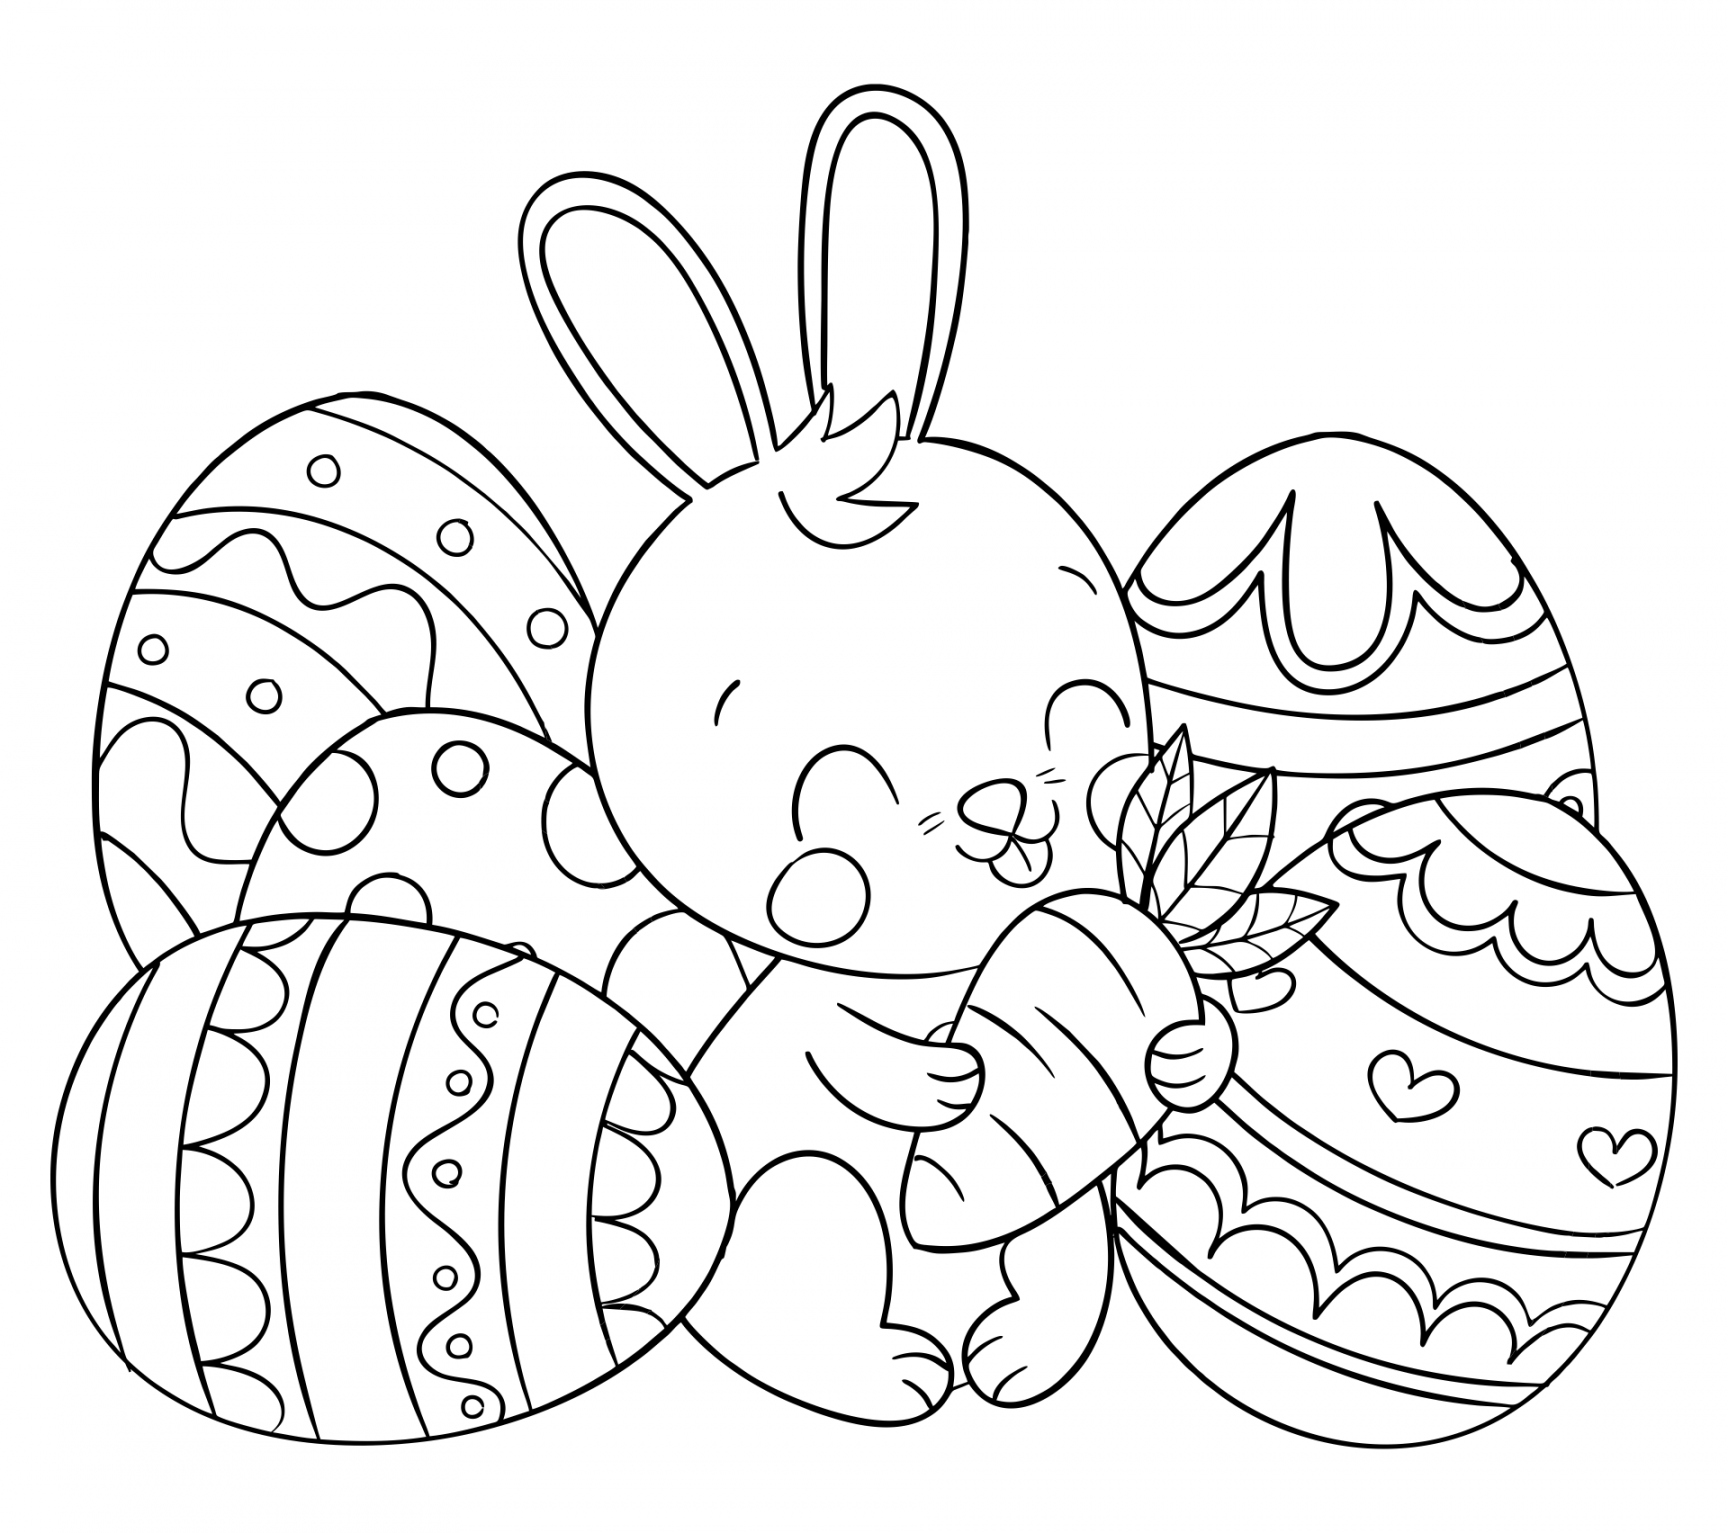 Best Free Printable Easter Egg Coloring Page - printablee - Easter Coloring Pages Free Printable